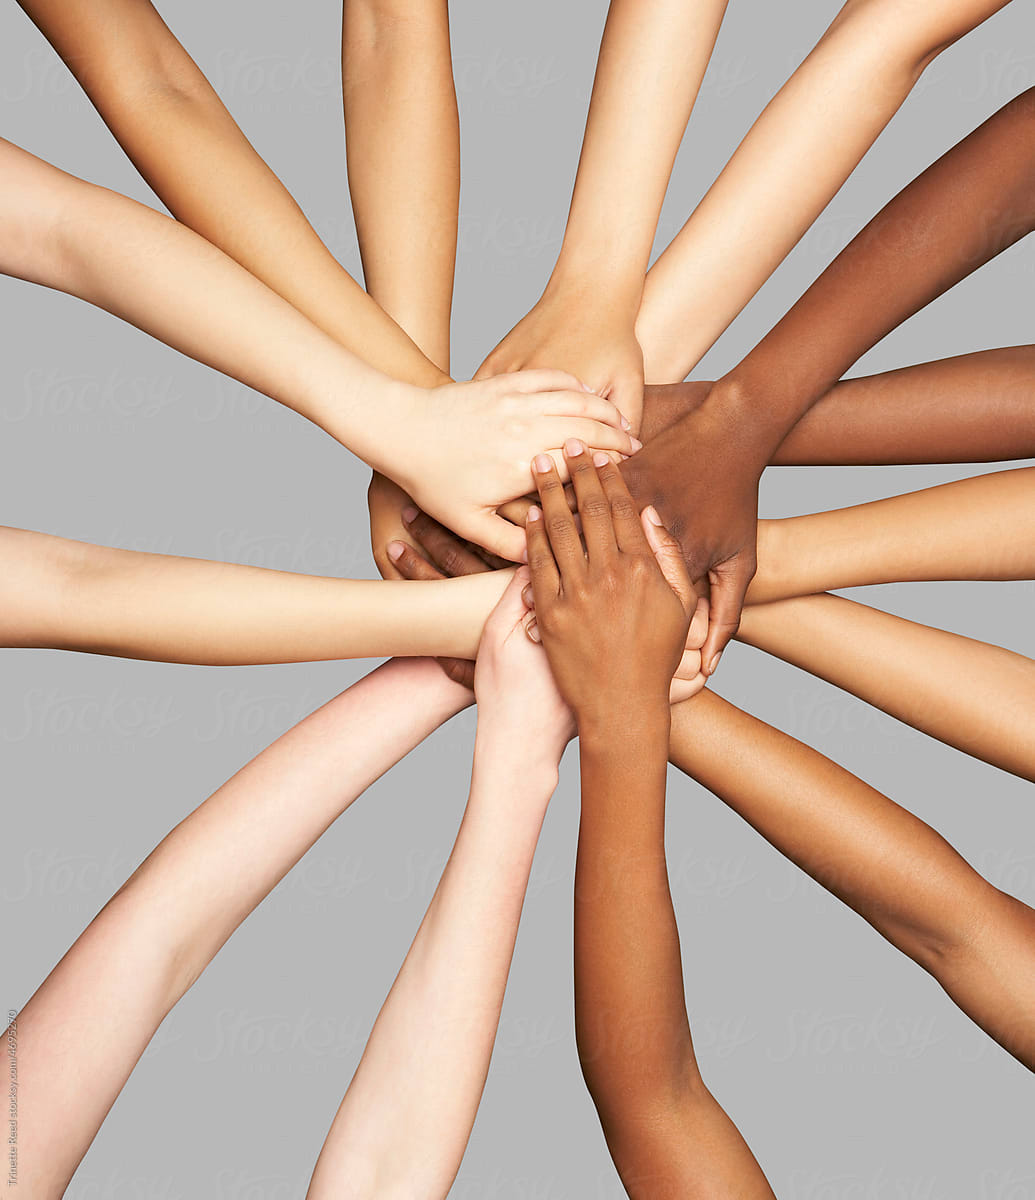 Group of diverse women's hands connected together in inclusion